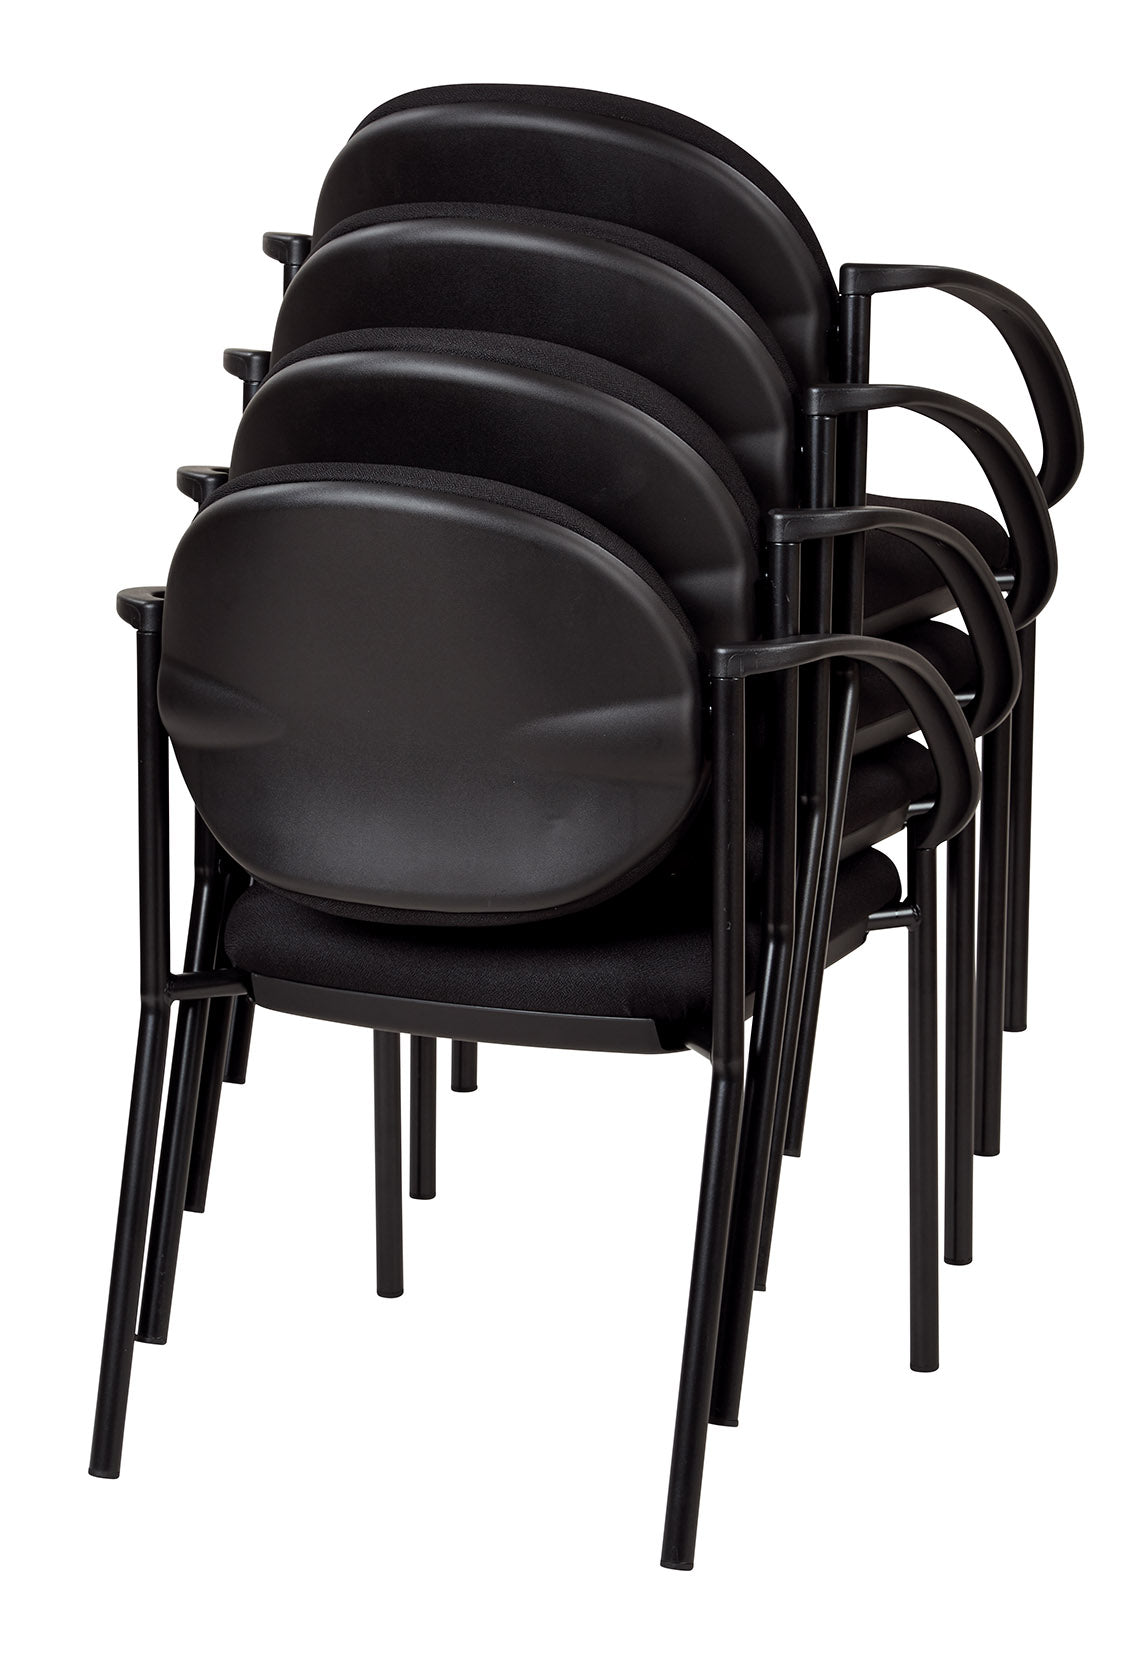 WorkSmart Stack Chairs with Arms - STC3410-231 - Functional Office Furniture - STC3410-231